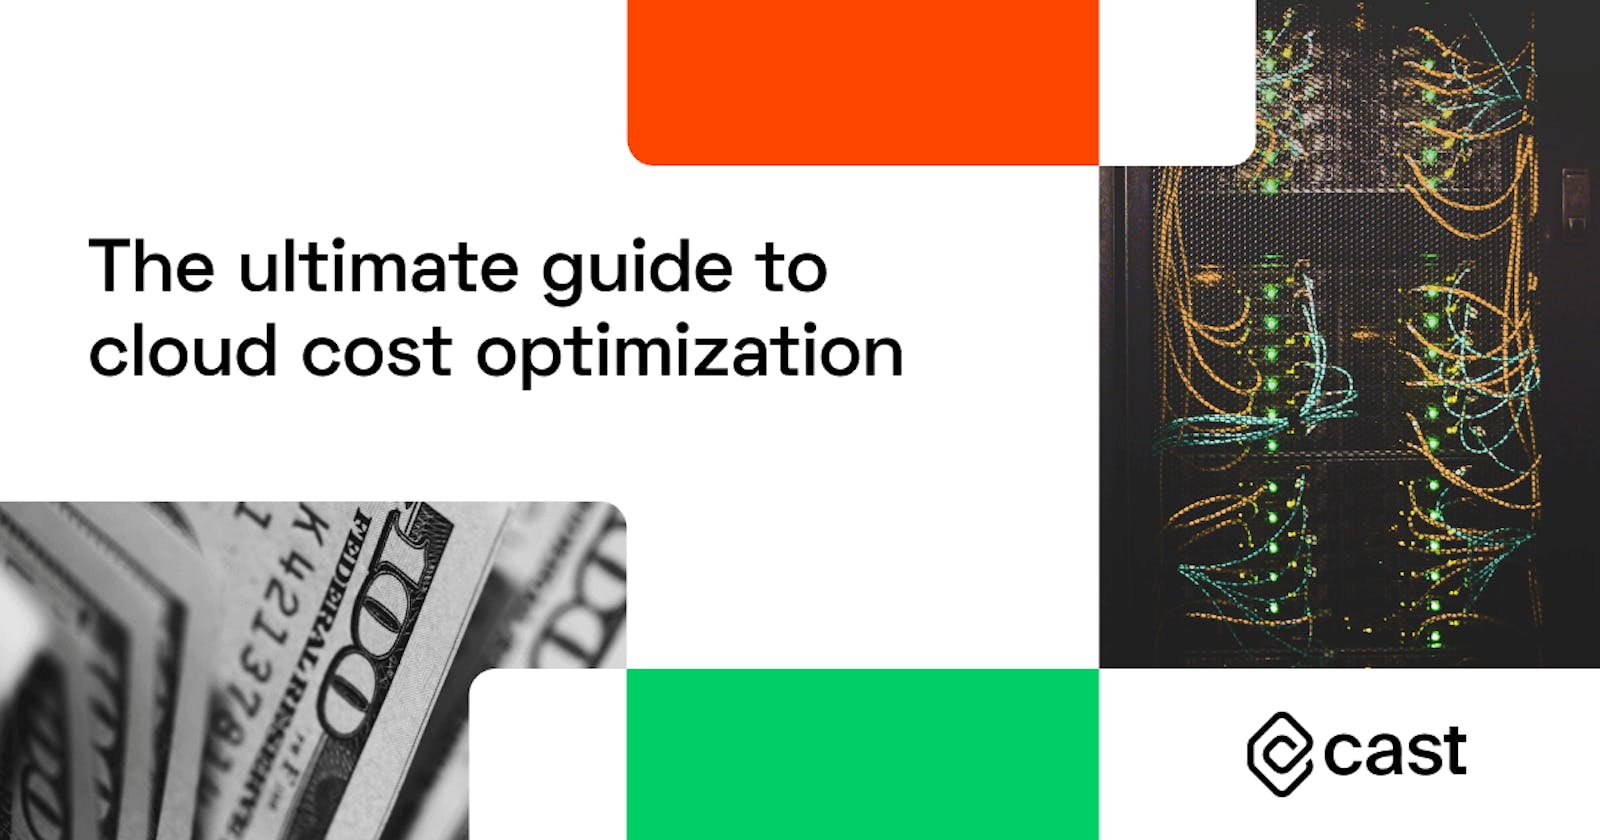 The ultimate guide to cloud cost optimization